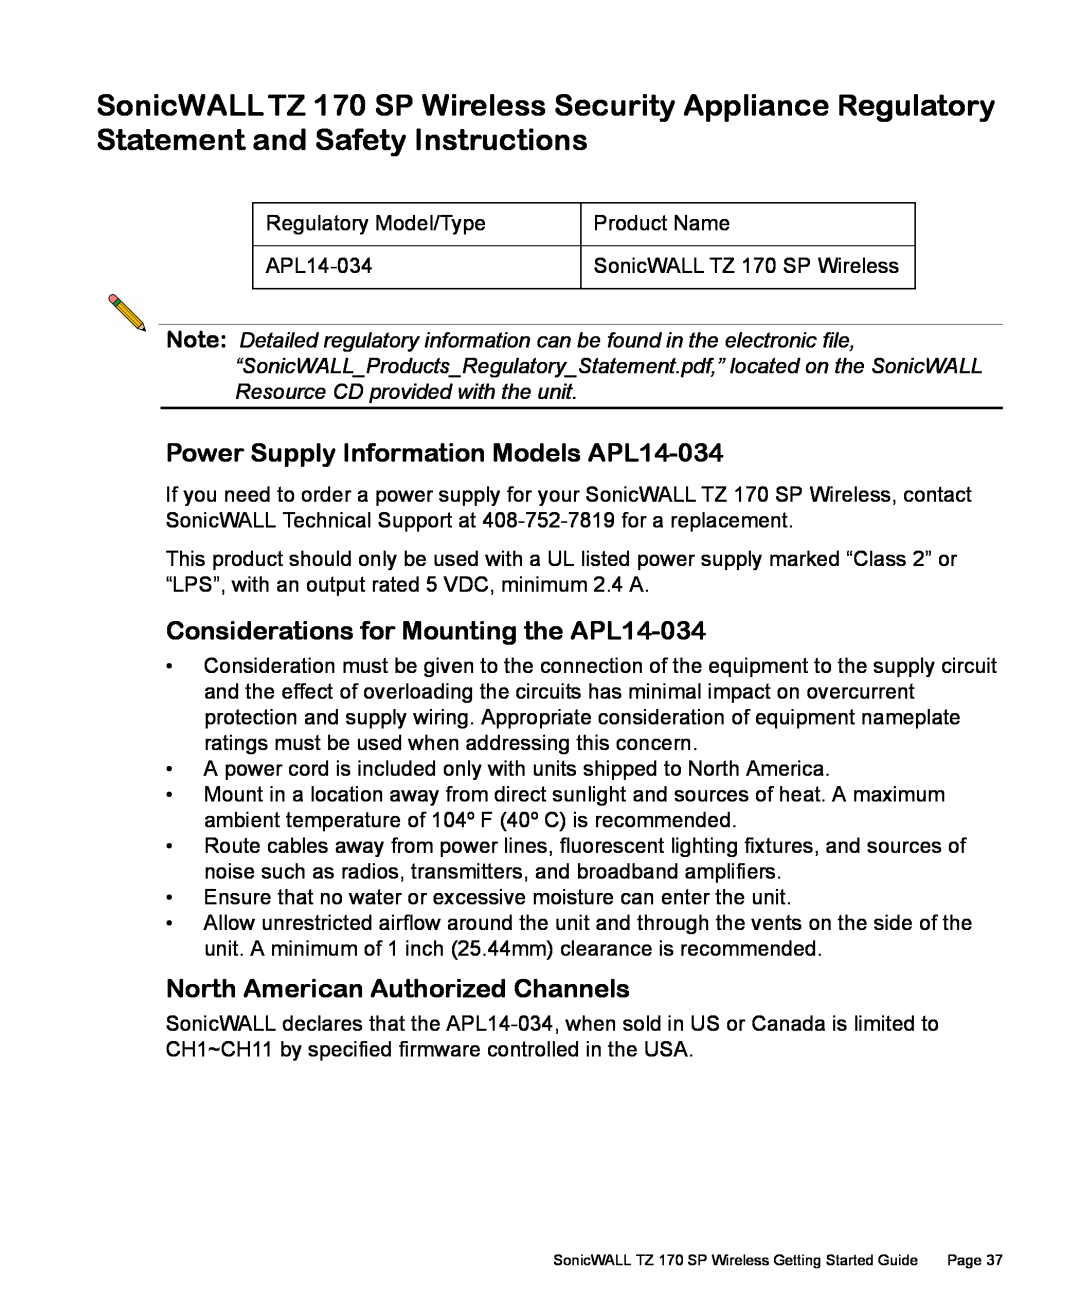 SonicWALL TZ 170 SP manual Power Supply Information Models APL14-034, Considerations for Mounting the APL14-034 